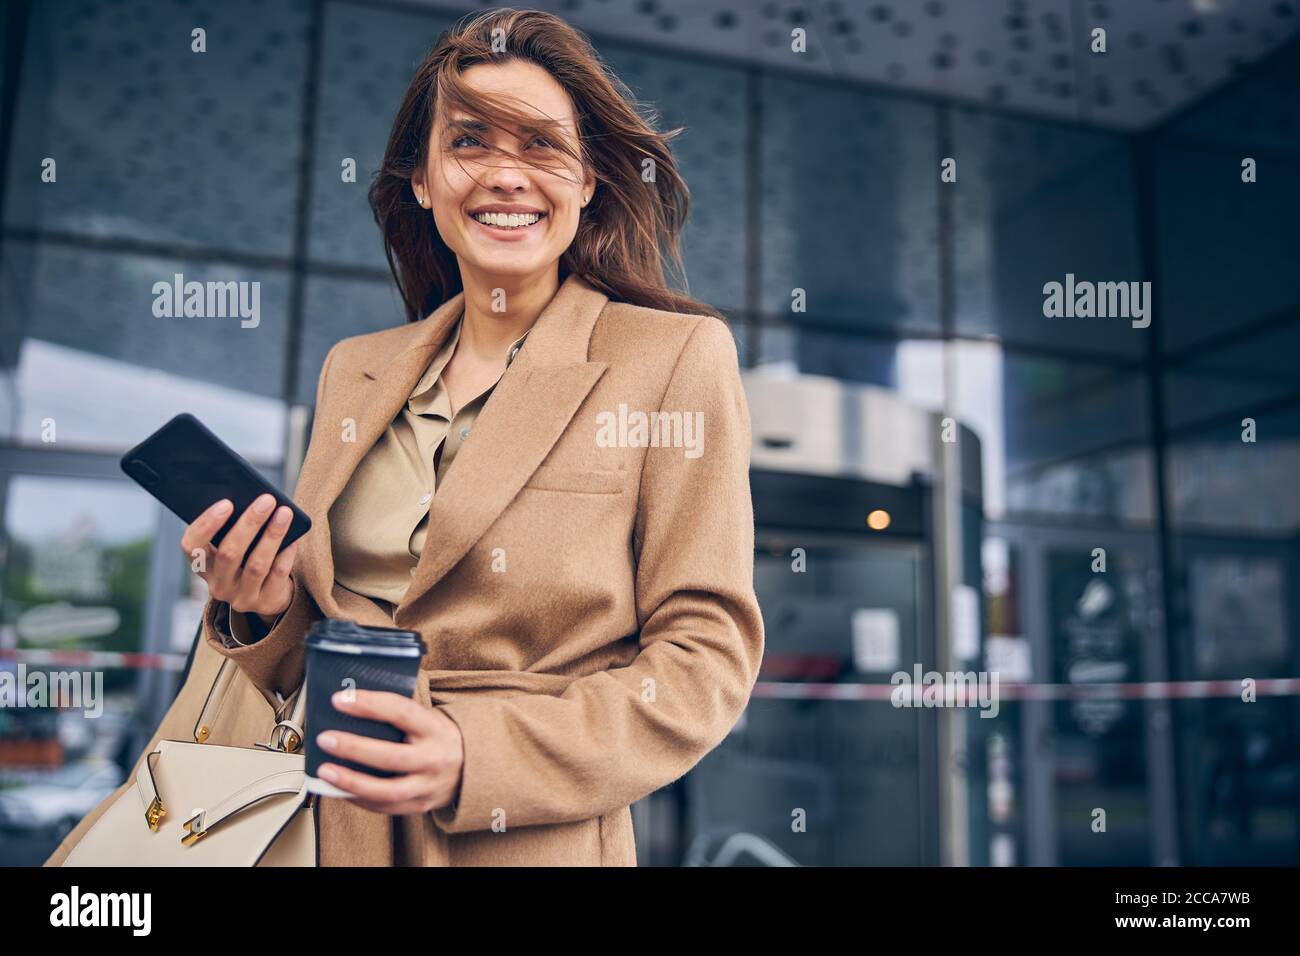 Pleased business lady staring into the distance Stock Photo